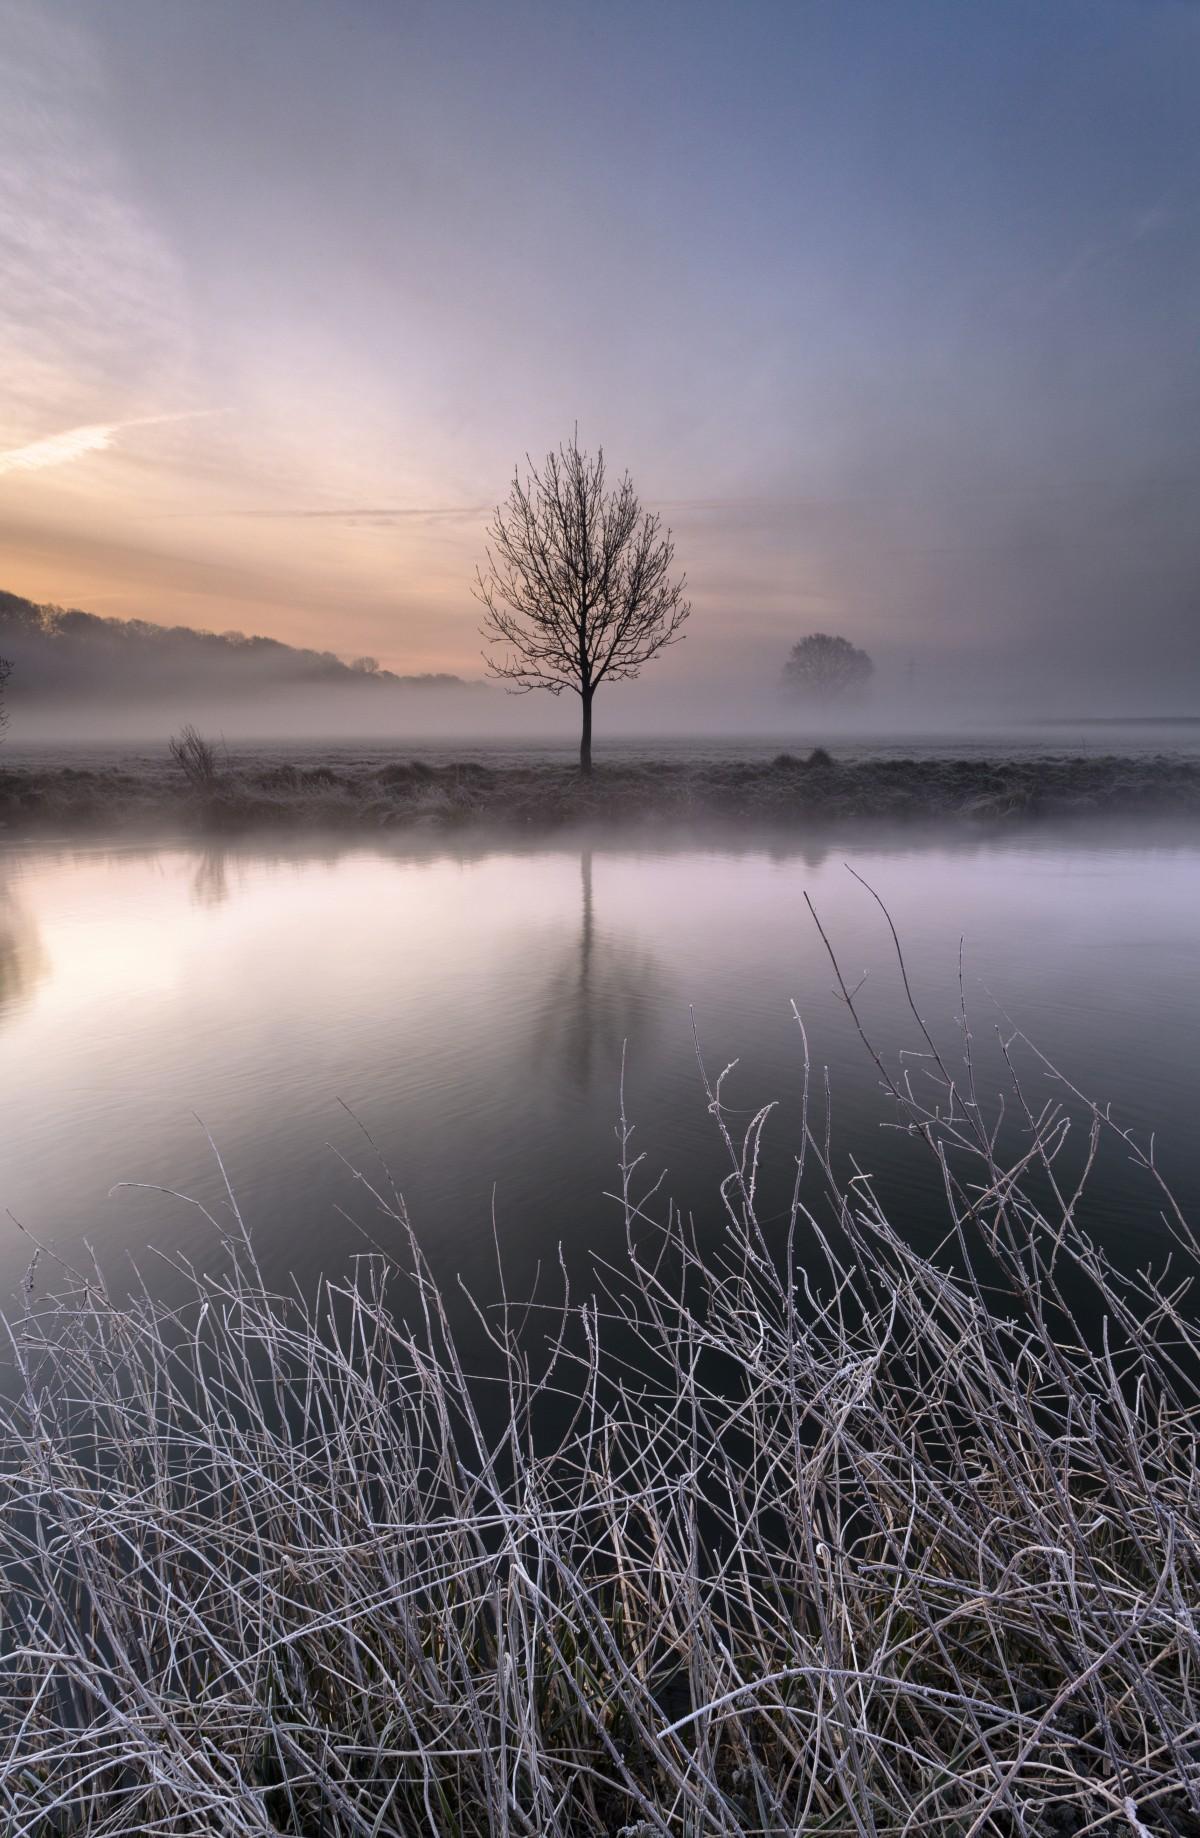 This picture was take on the Dorset Stour on a misty morning just as the sun was coming up. By Daniel Wretham